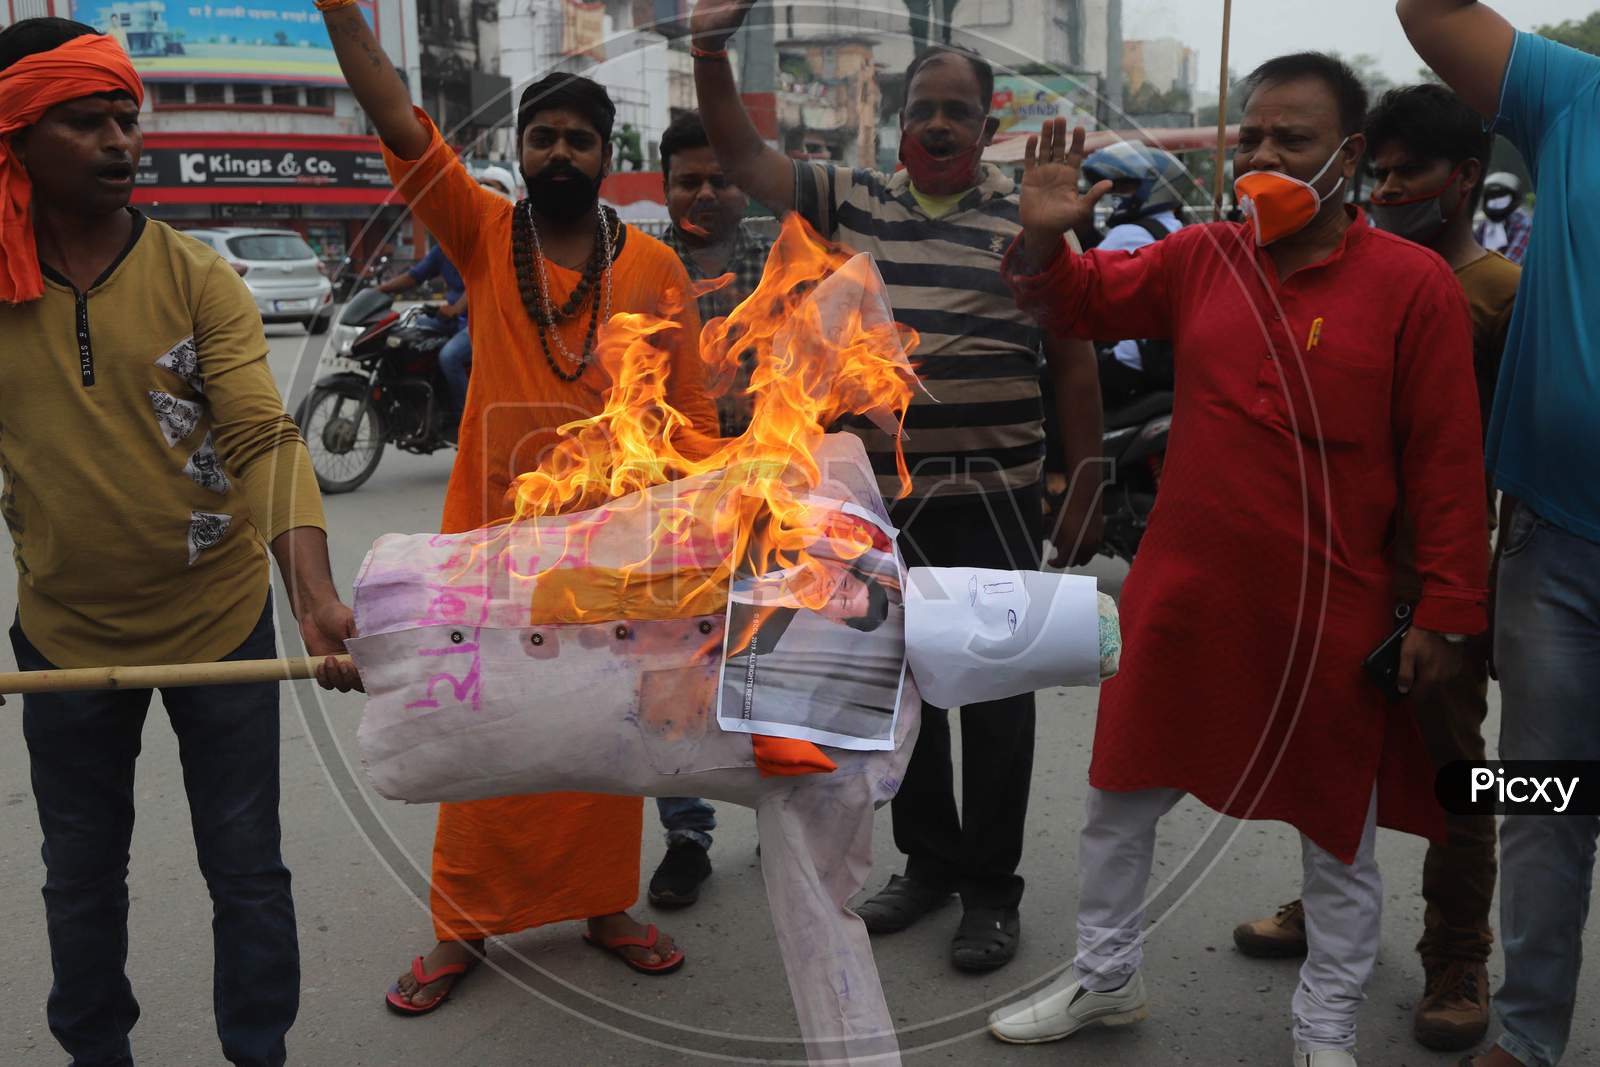 Supporters Of Bharatiya Jayanta Party (Bjp) Burn Posters and effigy of China's President Xi Jinping During A Protest Against China in Prayagraj on June 17, 2020 after a violent face off between Indian Army and Chinese PLA in Galwan Valley.